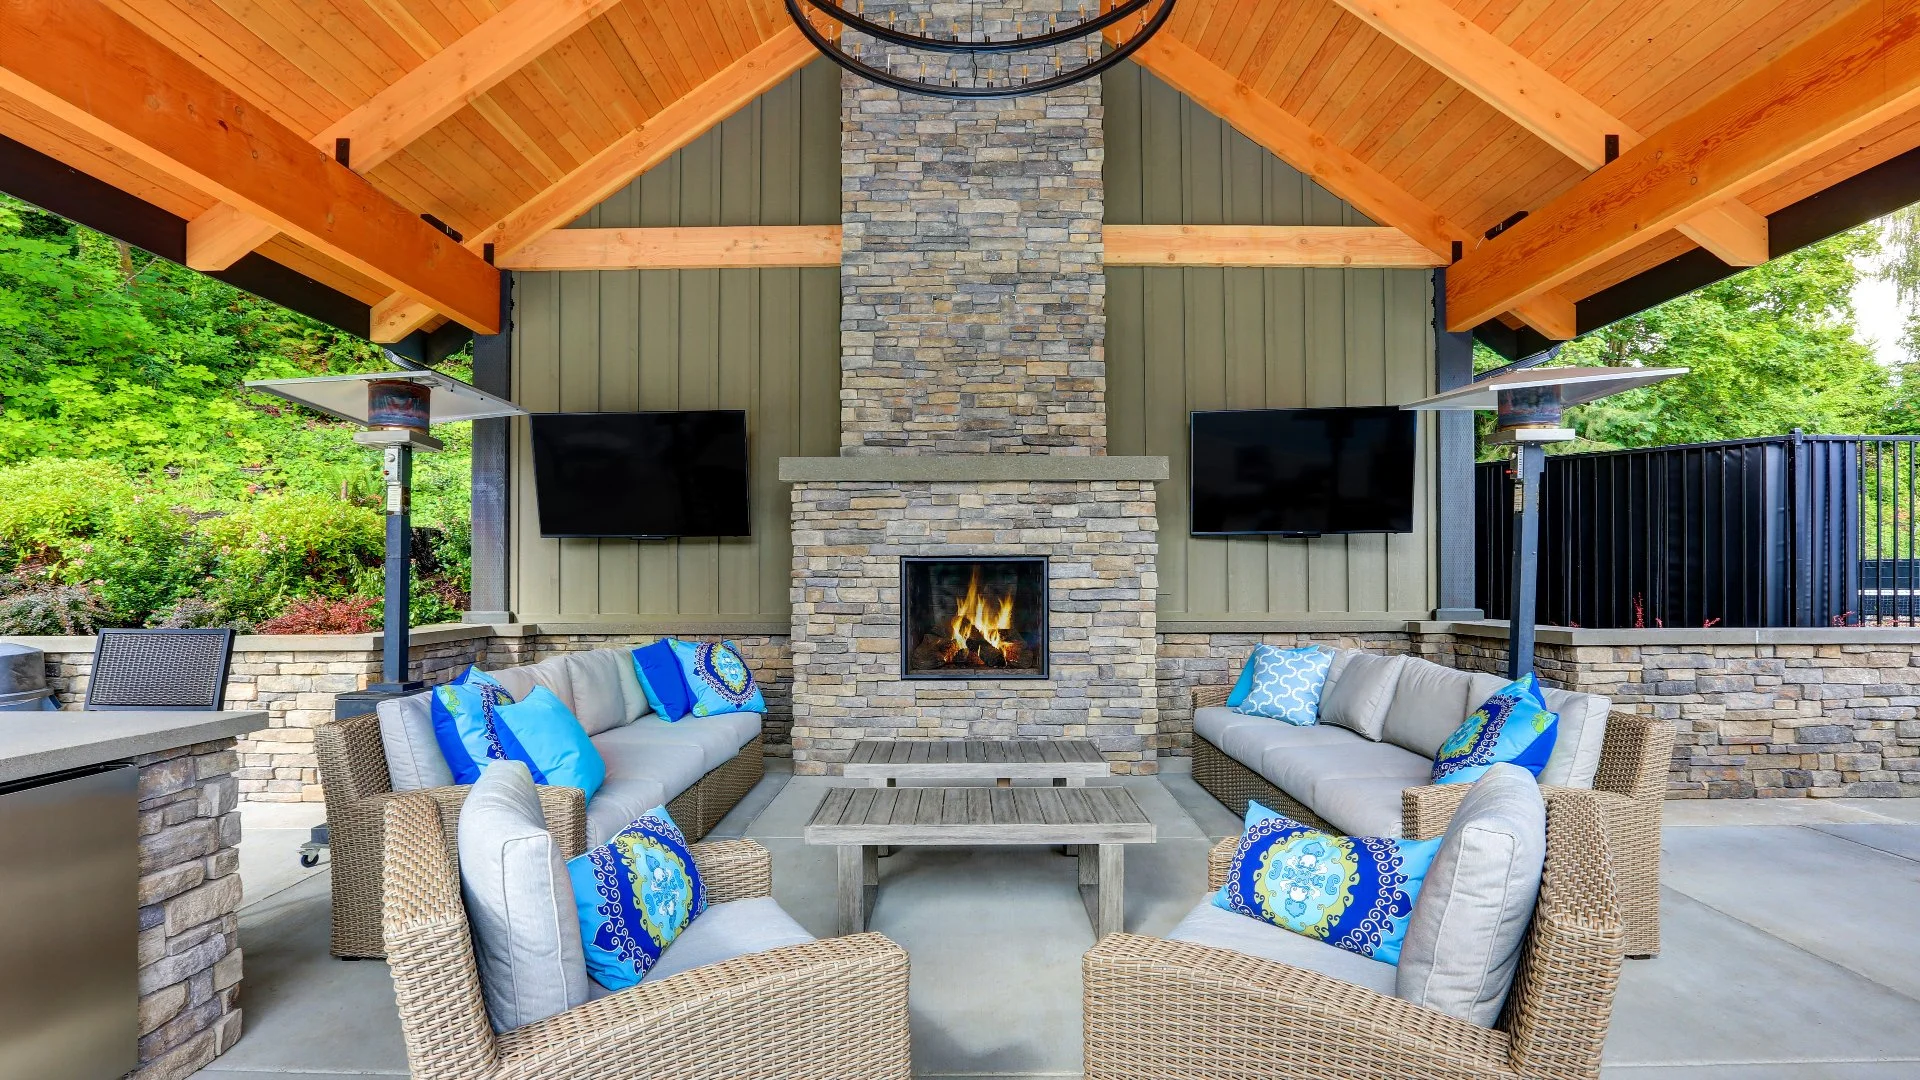 Will Investing in an Outdoor Fireplace Add Value to My Property?